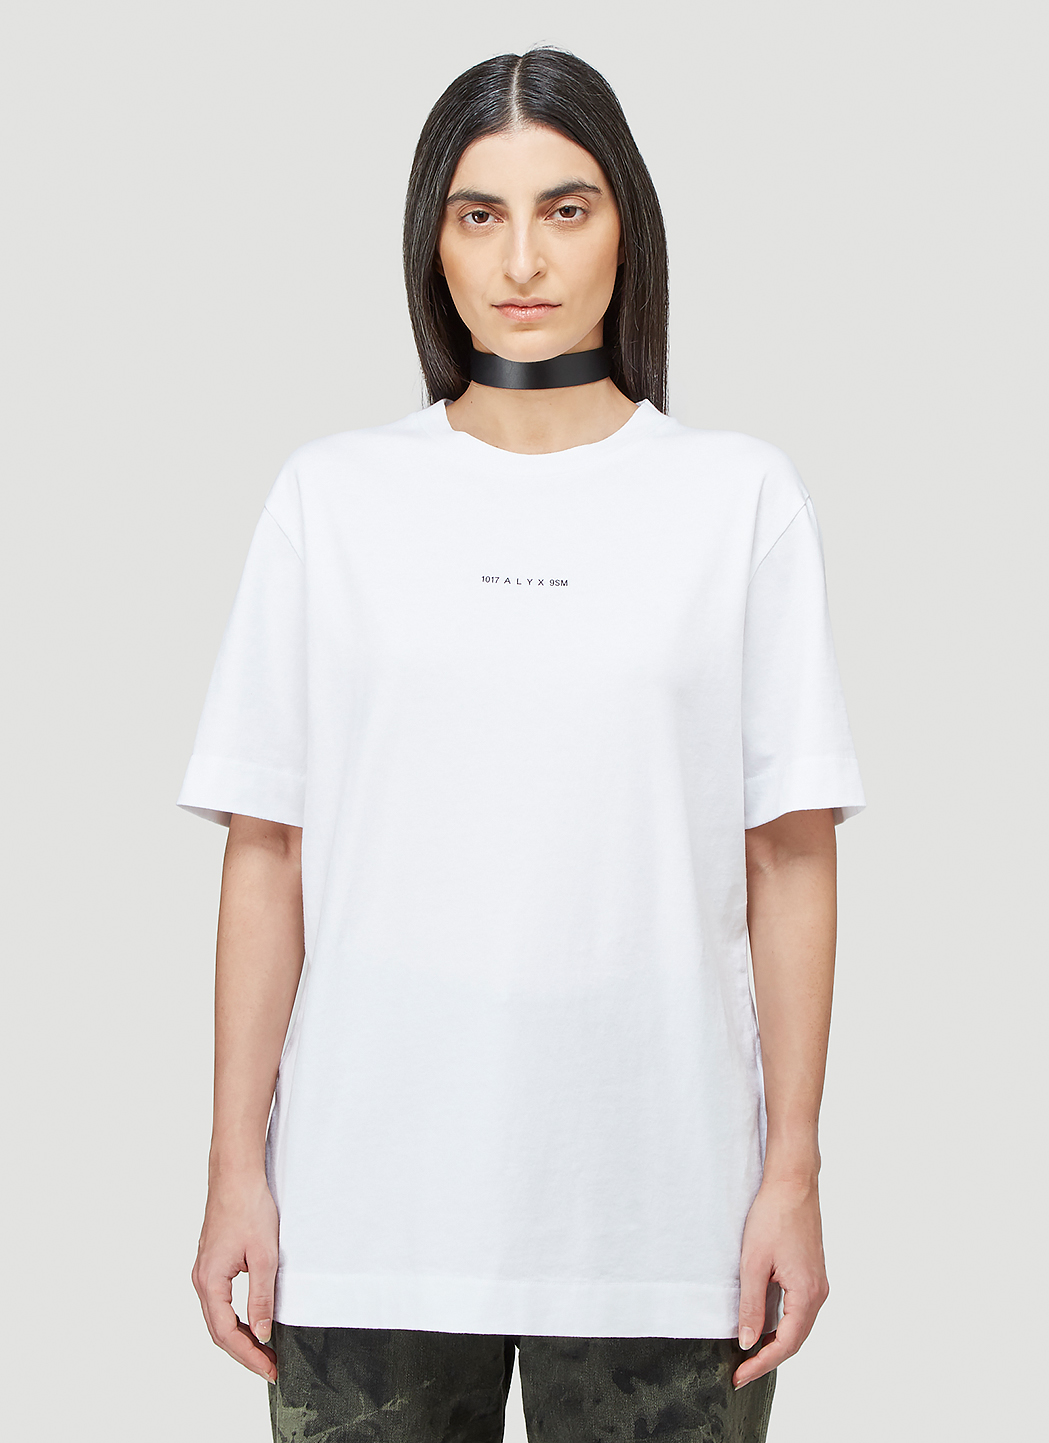 1017 ALYX 9SM Women's Collection Name T-Shirt in White | LN-CC